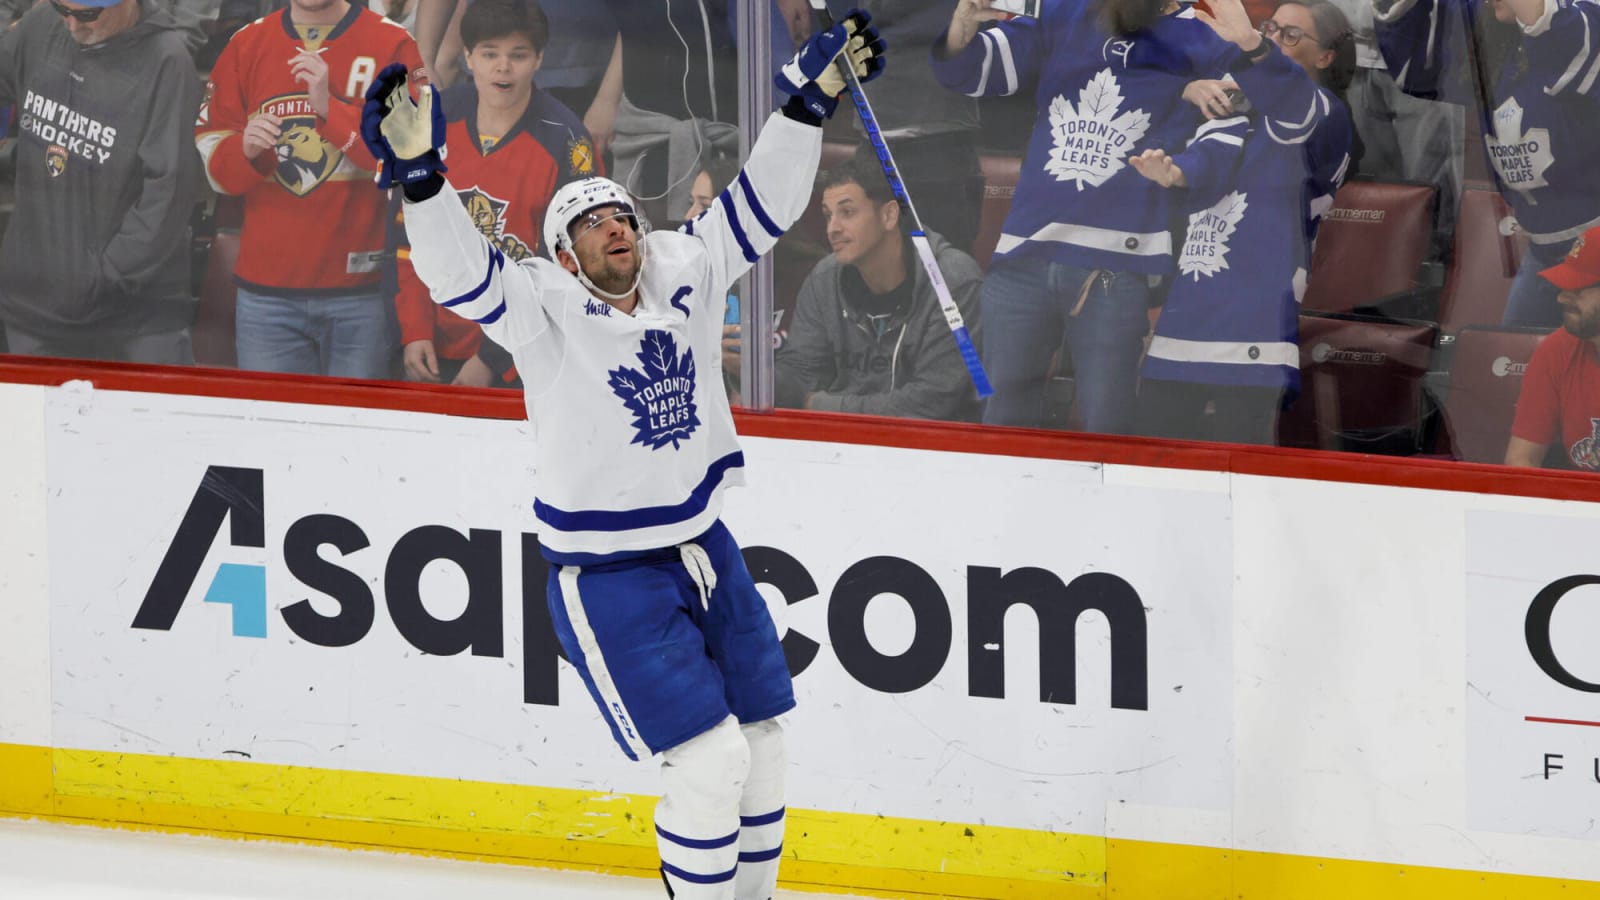 It’s time for the Maple Leafs captain to lead